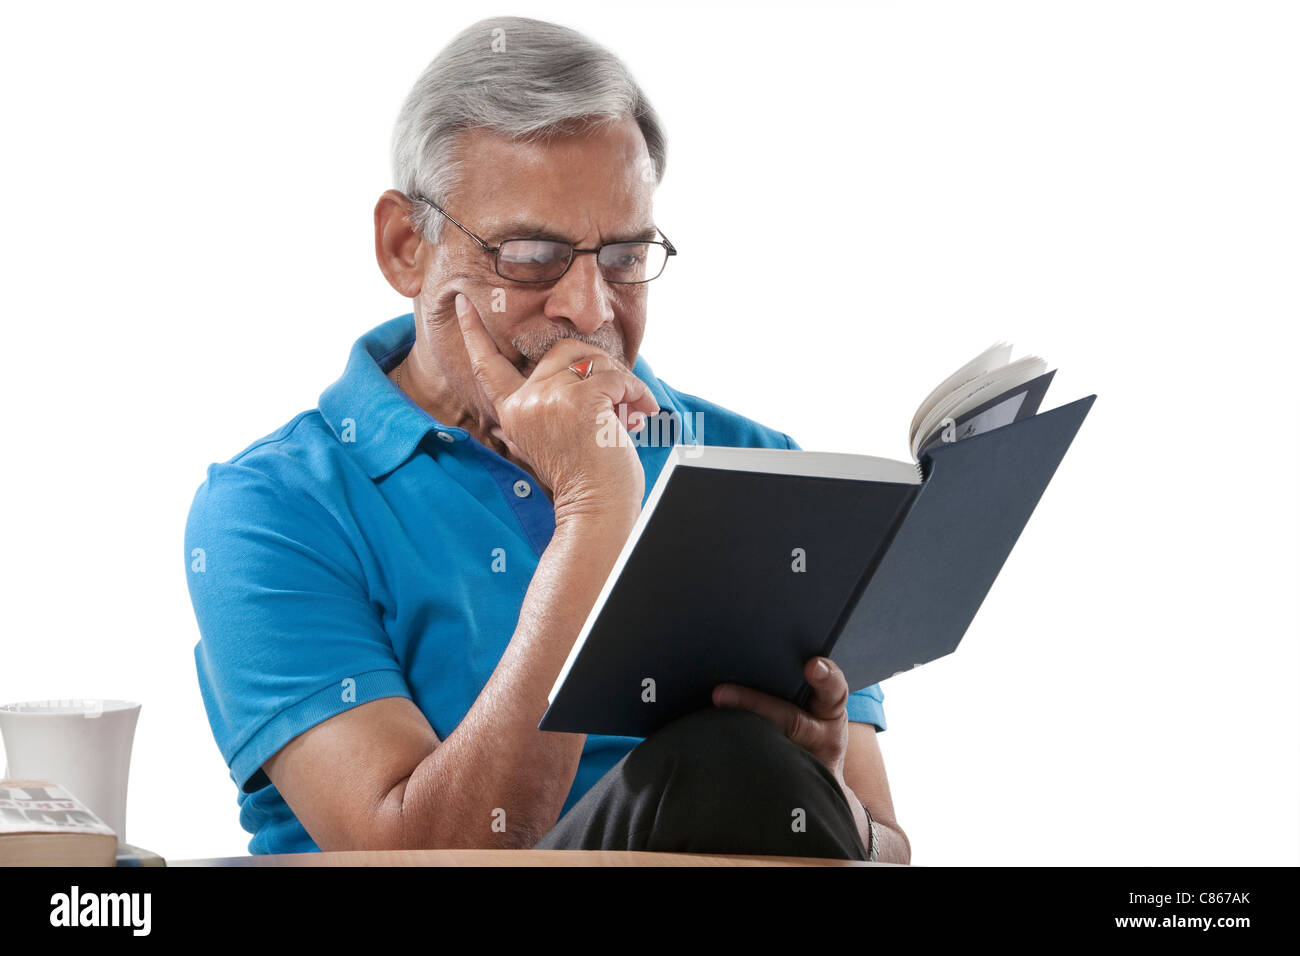 Old man reading a book Stock Photo